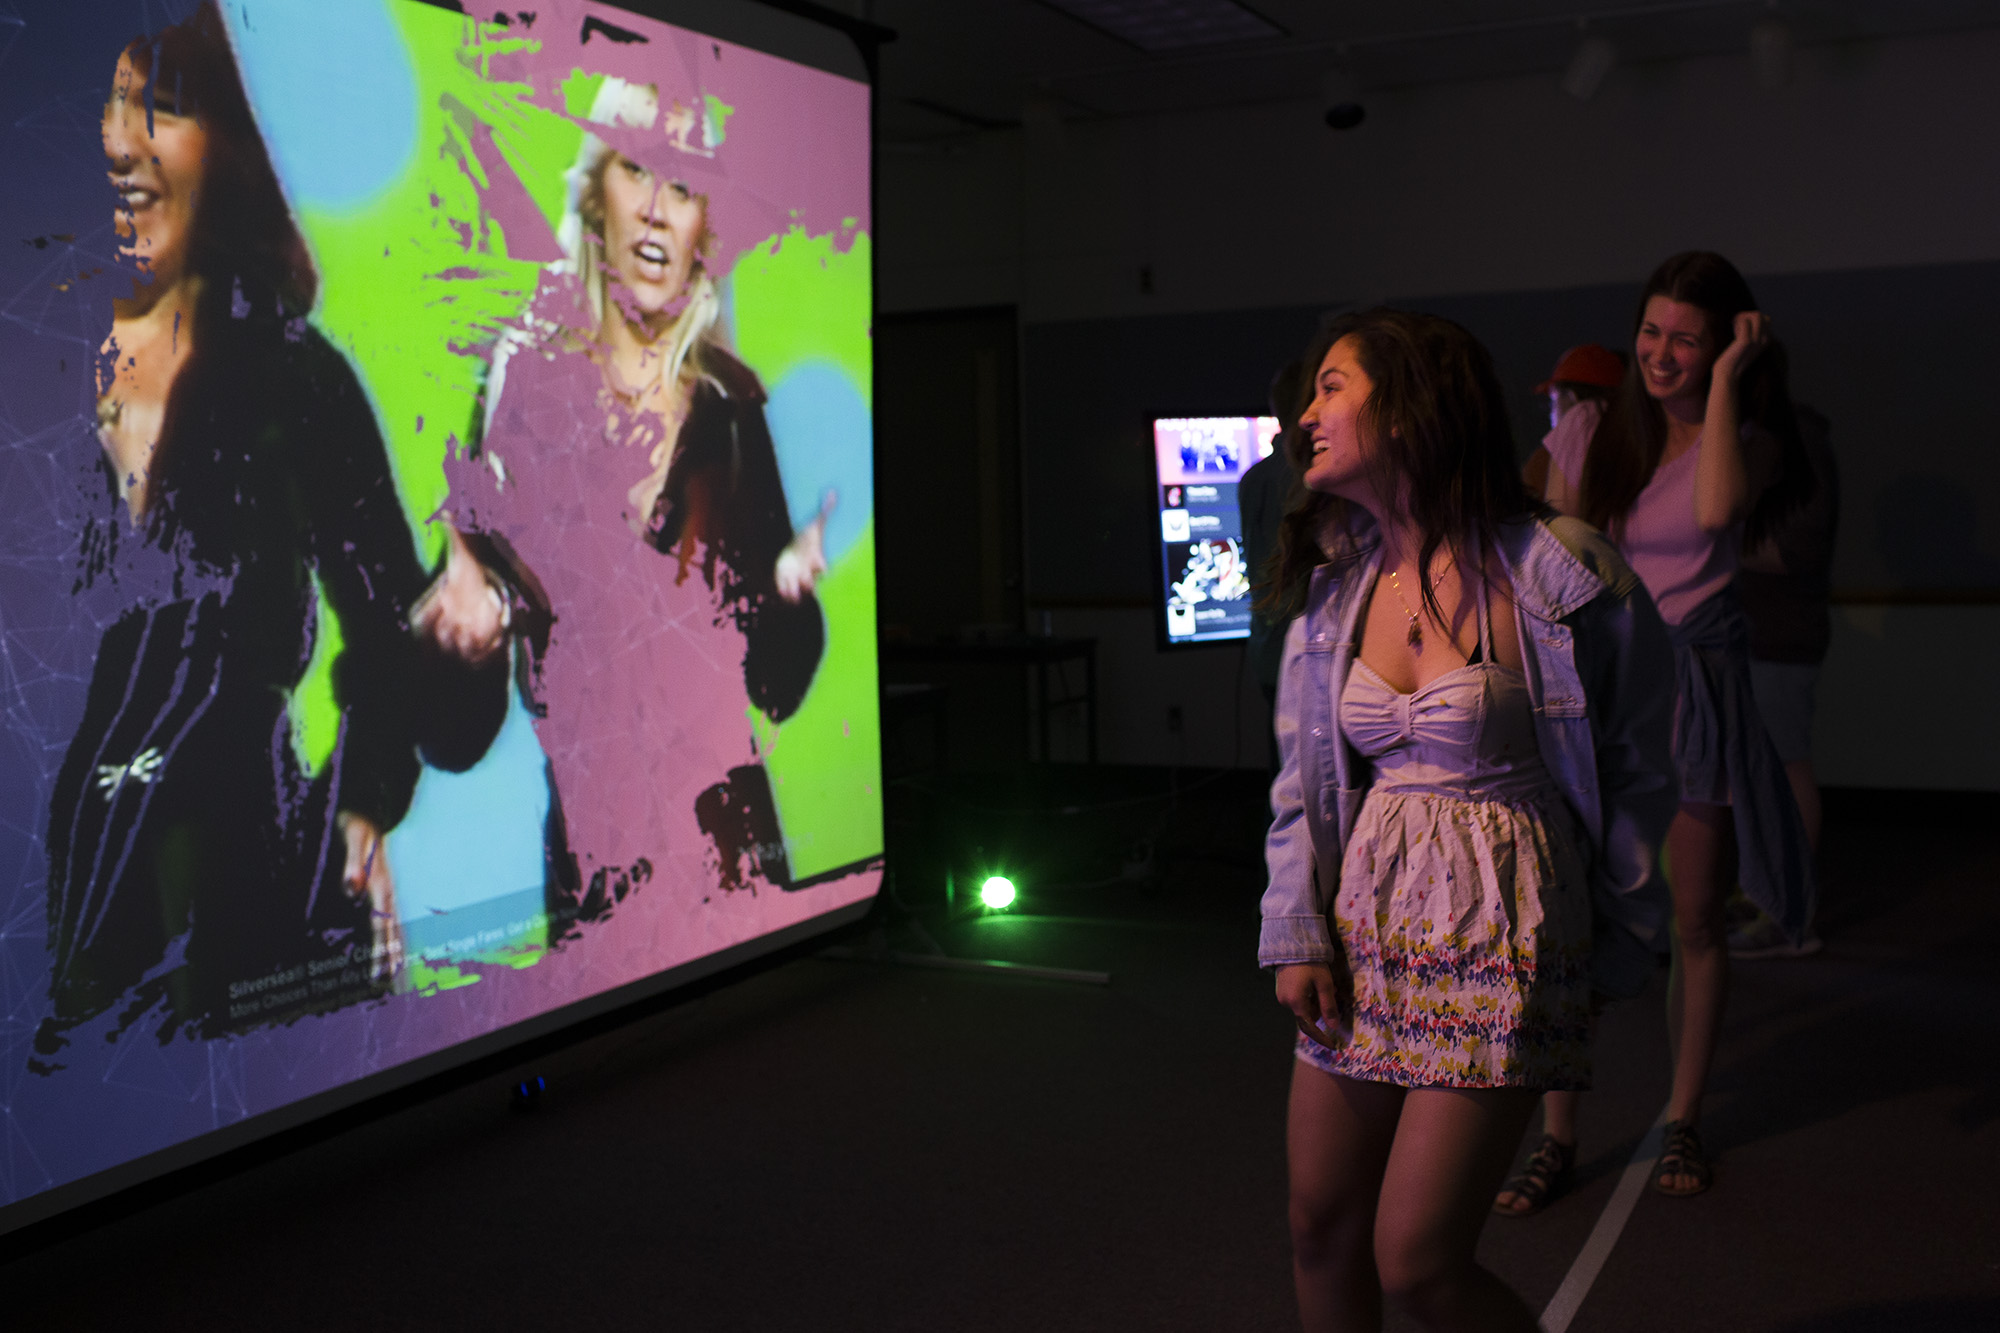 Ferret Shaukat (left), a fourth year Visual Media student, and Chelsea Clarke (right), a fourth year Advertising Photography student, dances in front of s screen to reveal an image as part of the Evoxe exhibit during Imagine RIT: Innovation and Creativity Festival on the Rochester Institute of Technology campus in Rochester, N.Y., May 7, 2016.  #imaginerit #ritpj